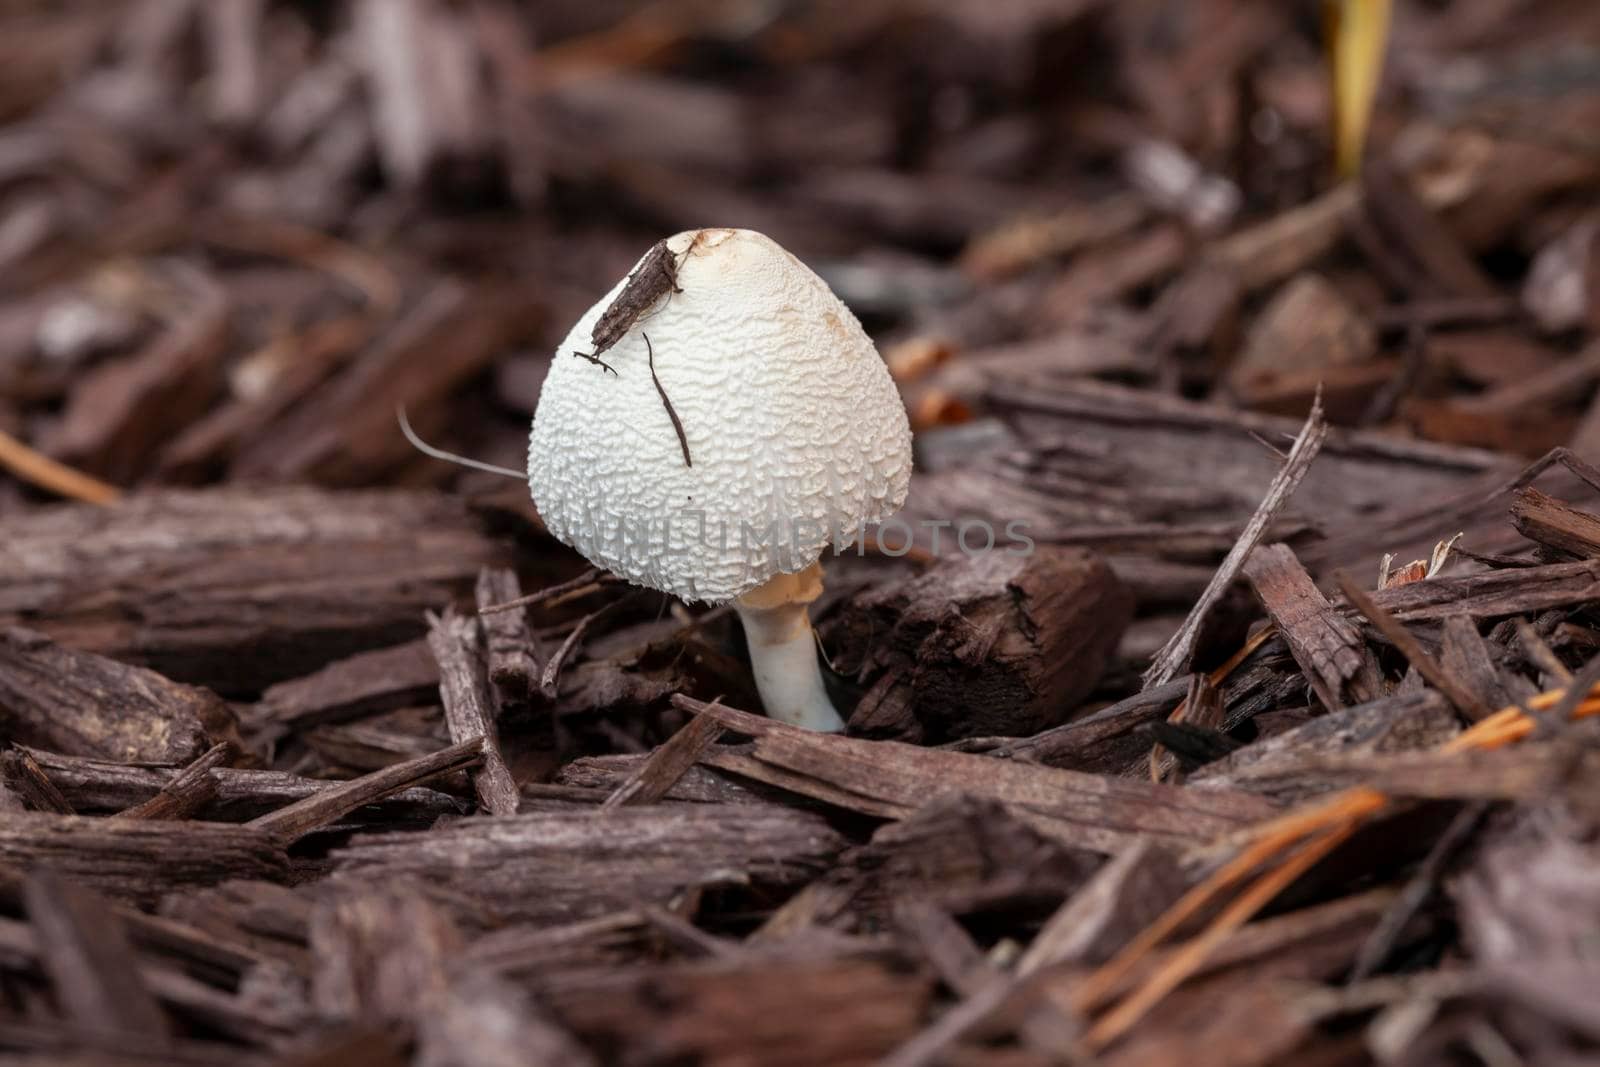 A white mushroom growing in the garden surrounded by bark chips